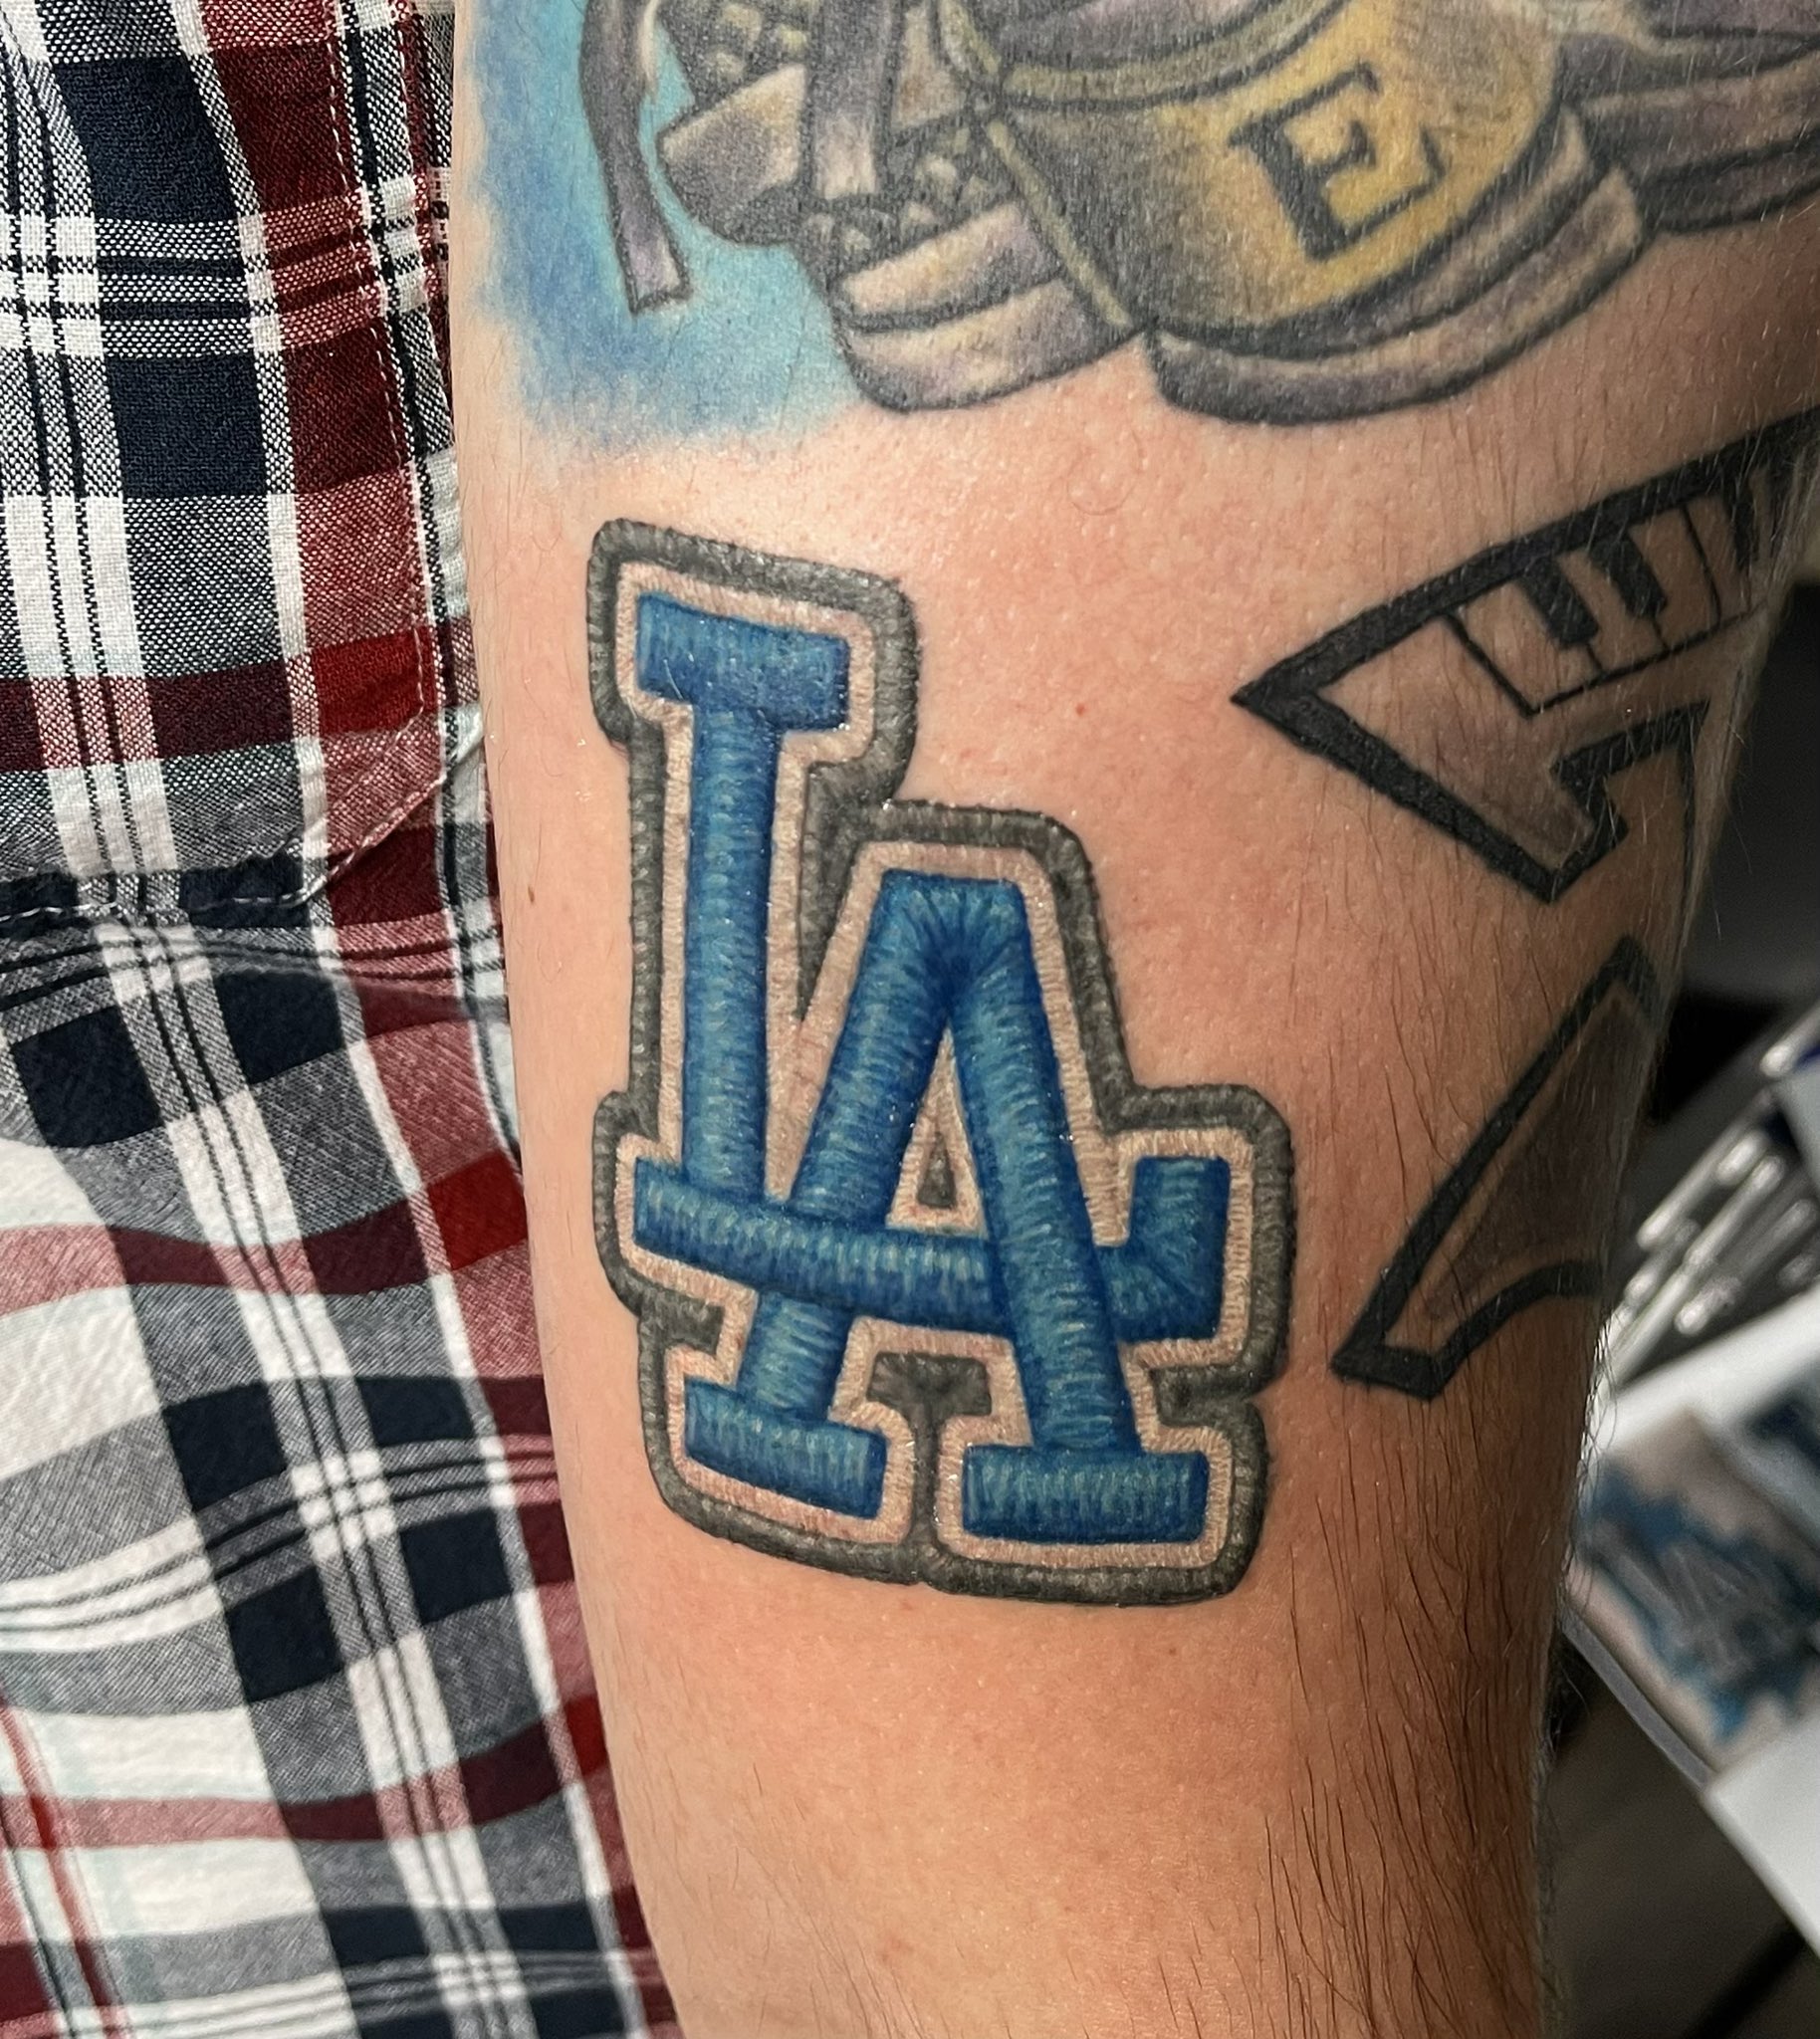 As promised Dodgers themed tattoos for 40  rDodgers